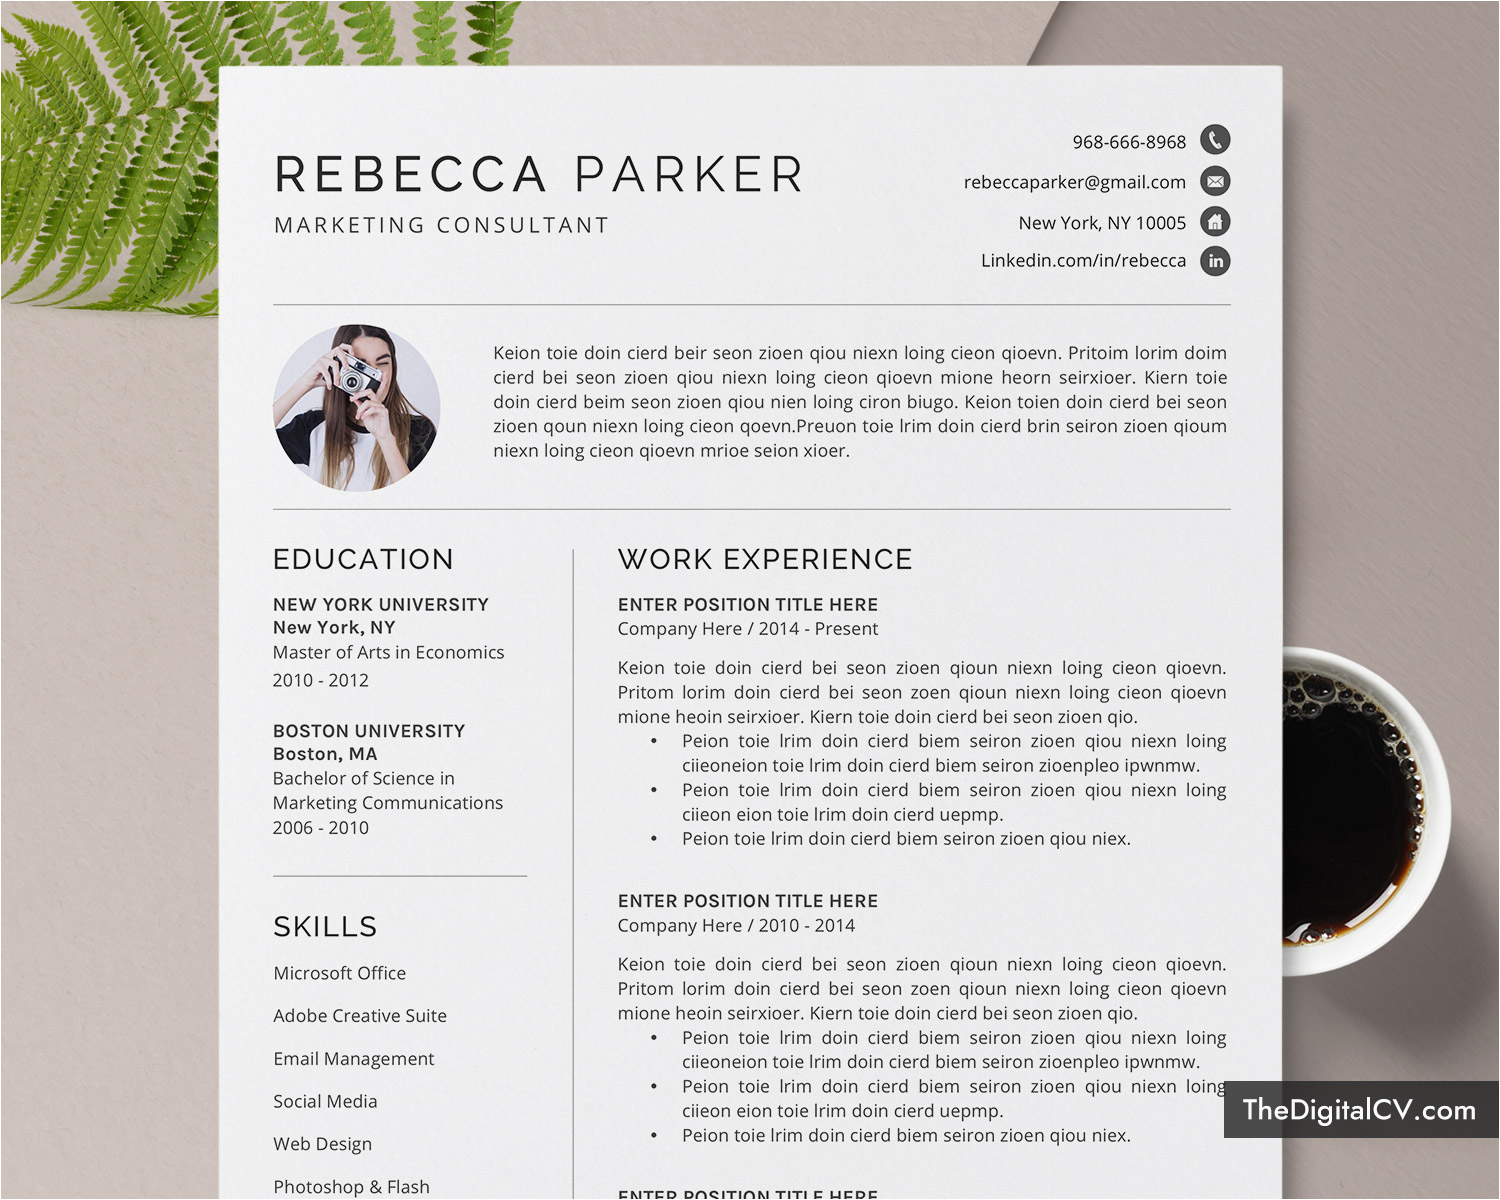 Resume format 2022 Template Free Download 2021 Cv Templates for College Students Graduates and